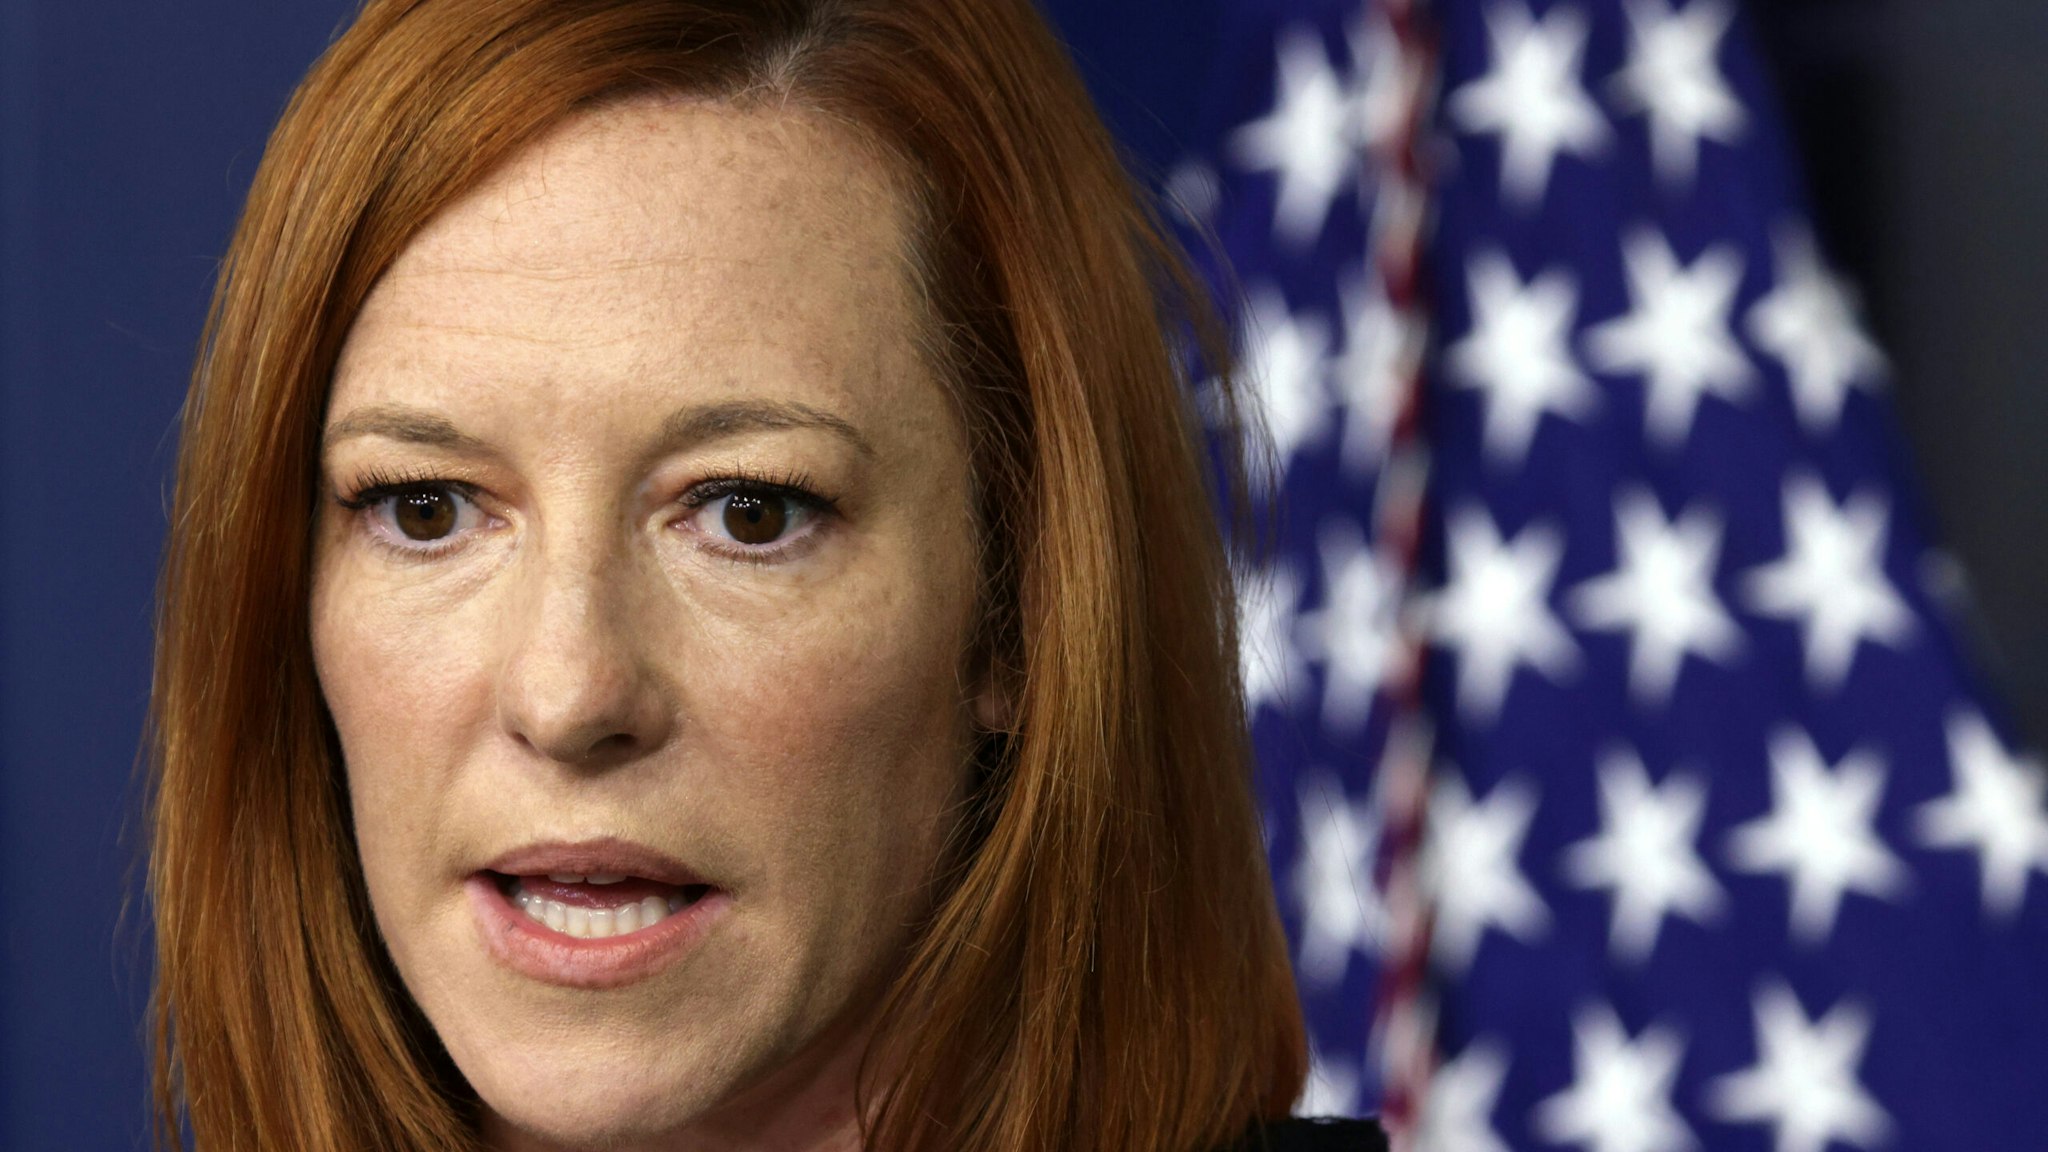 WASHINGTON, DC - SEPTEMBER 20: White House Press Secretary Jen Psaki speaks during the daily press briefing in the James S. Brady Press Briefing Room at the White House September 20, 2021 in Washington, DC. Psaki held the briefing to answer questions from members of the White House press corps.